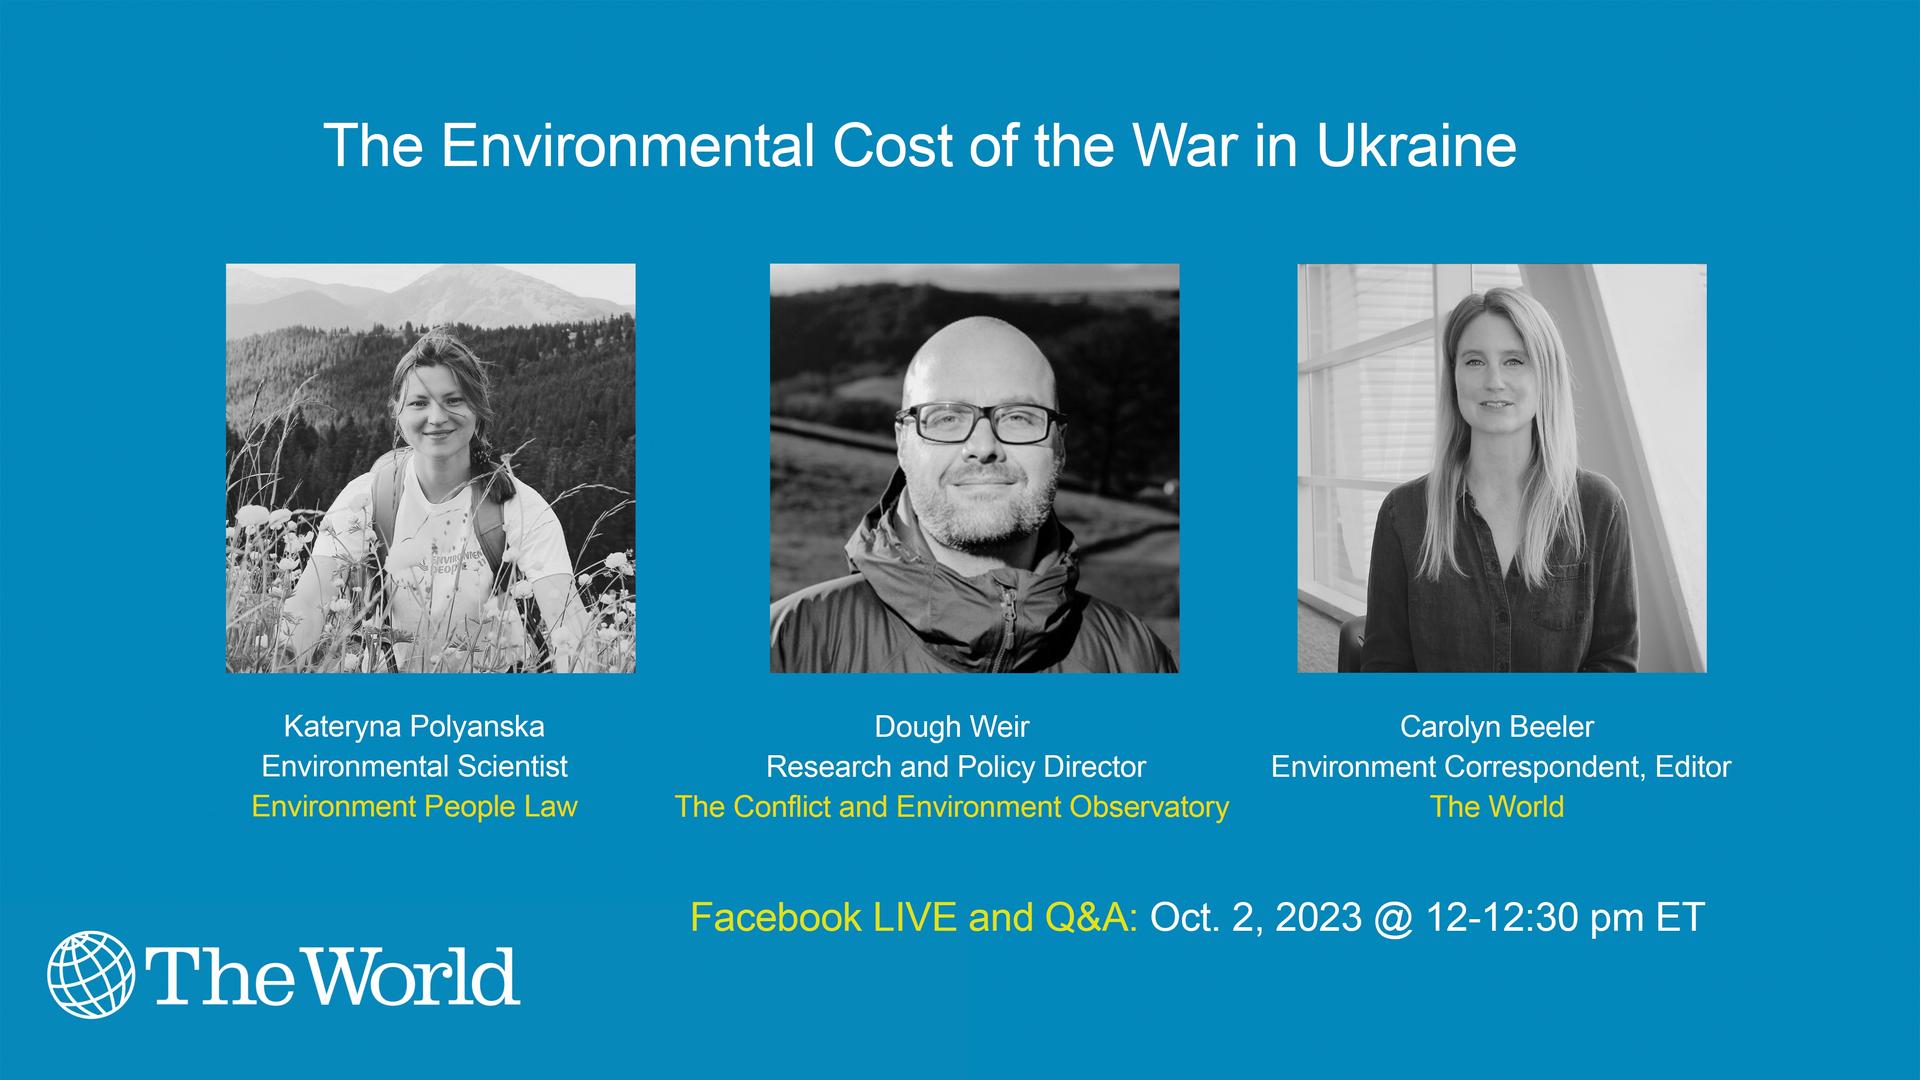 Facebook live event focusing on the environmental impact of the war in Ukraine.